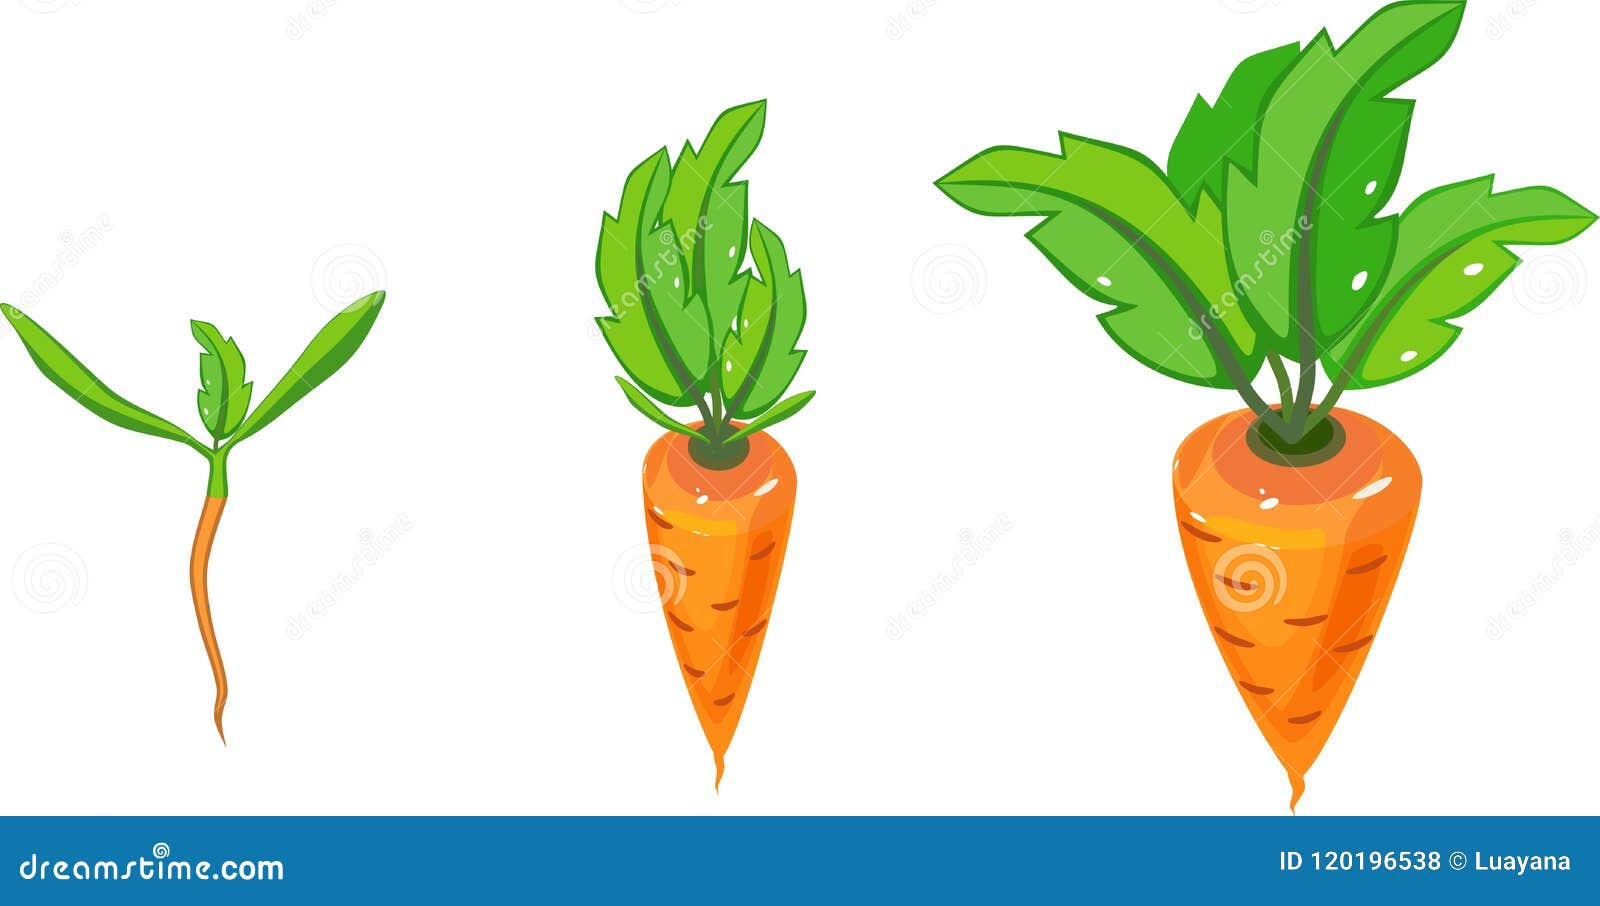 Stages of Growth of Carrot on White Background Stock Vector ...